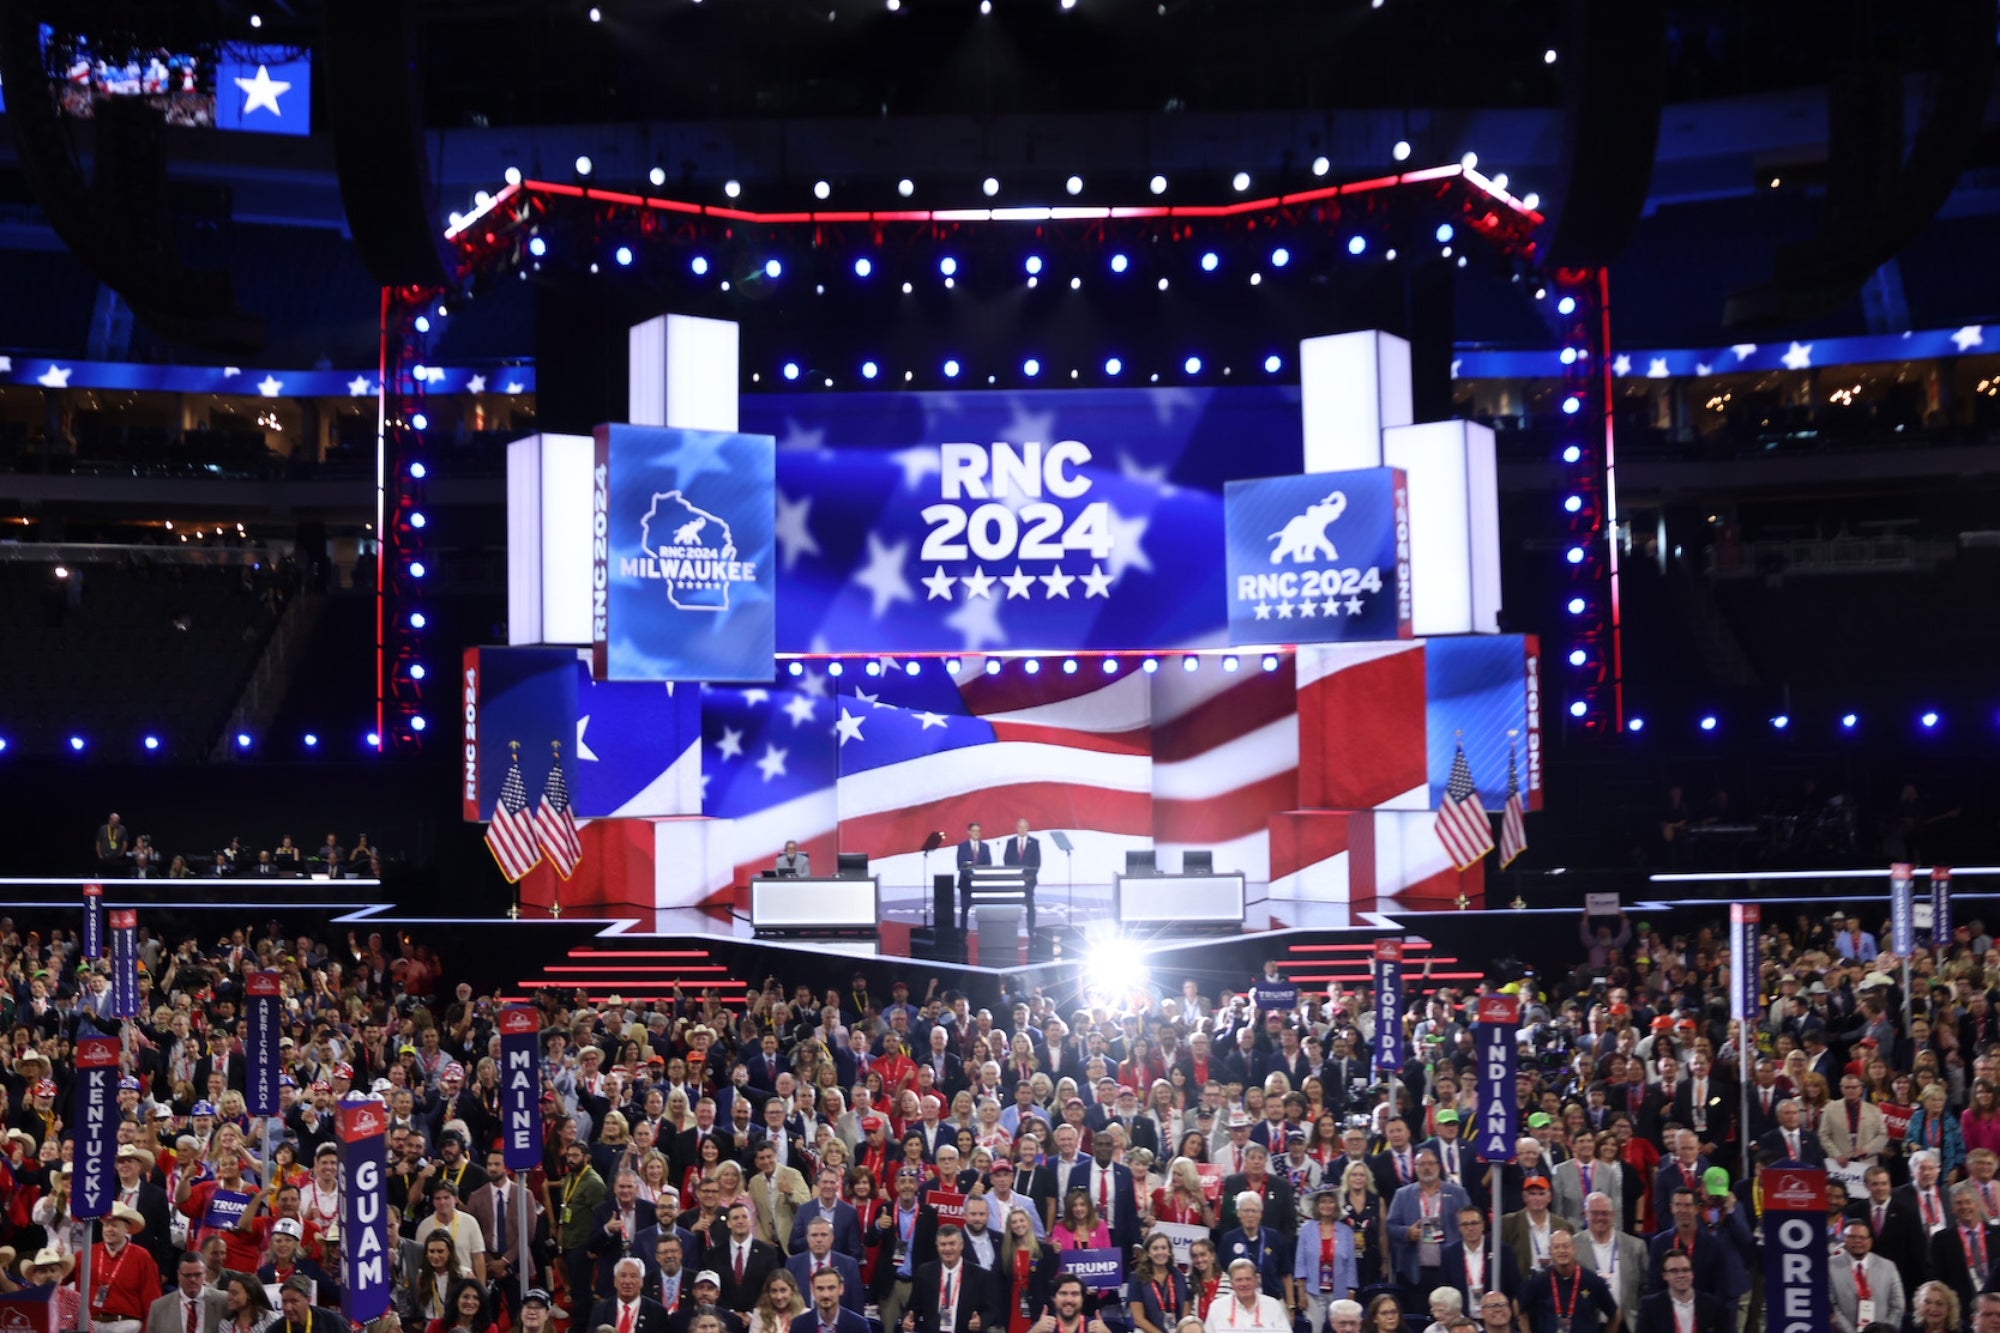 4 Takeaways For Franchising From the RNC